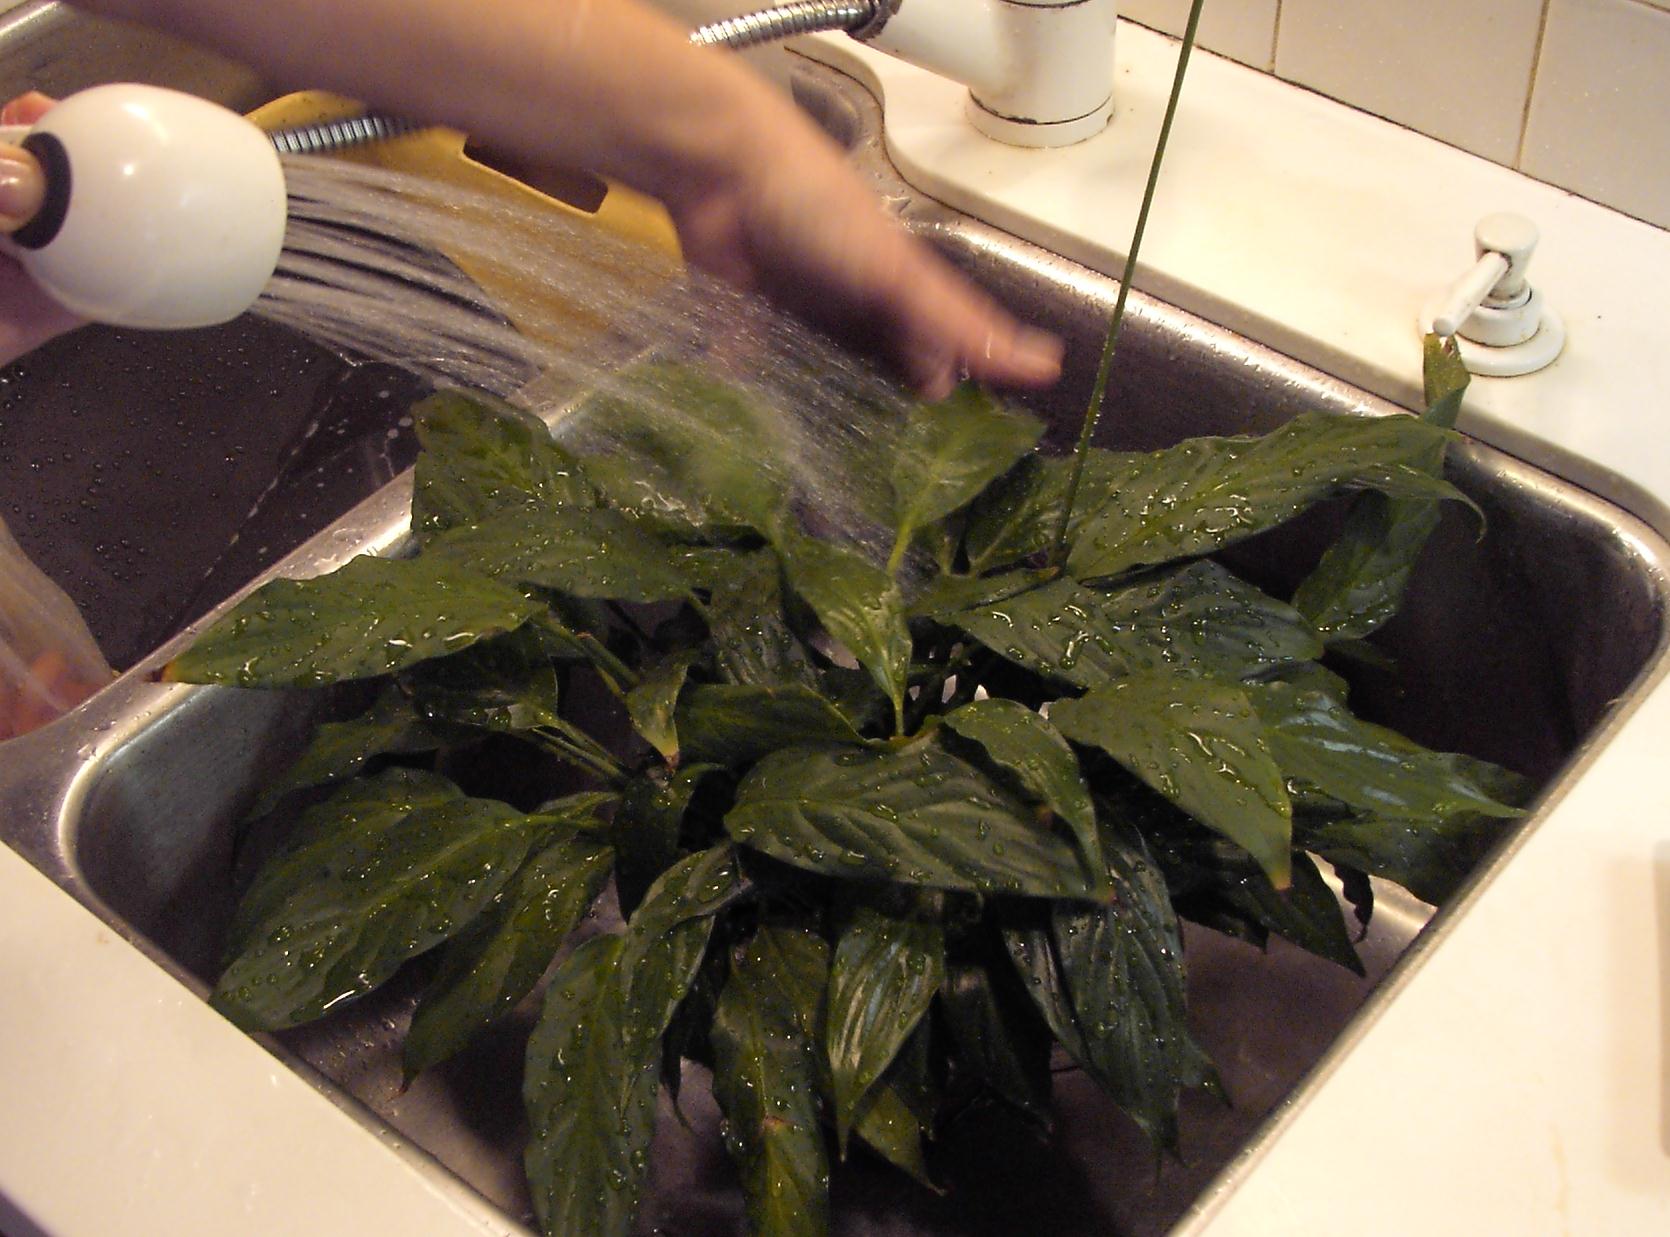 Give your plants a shower